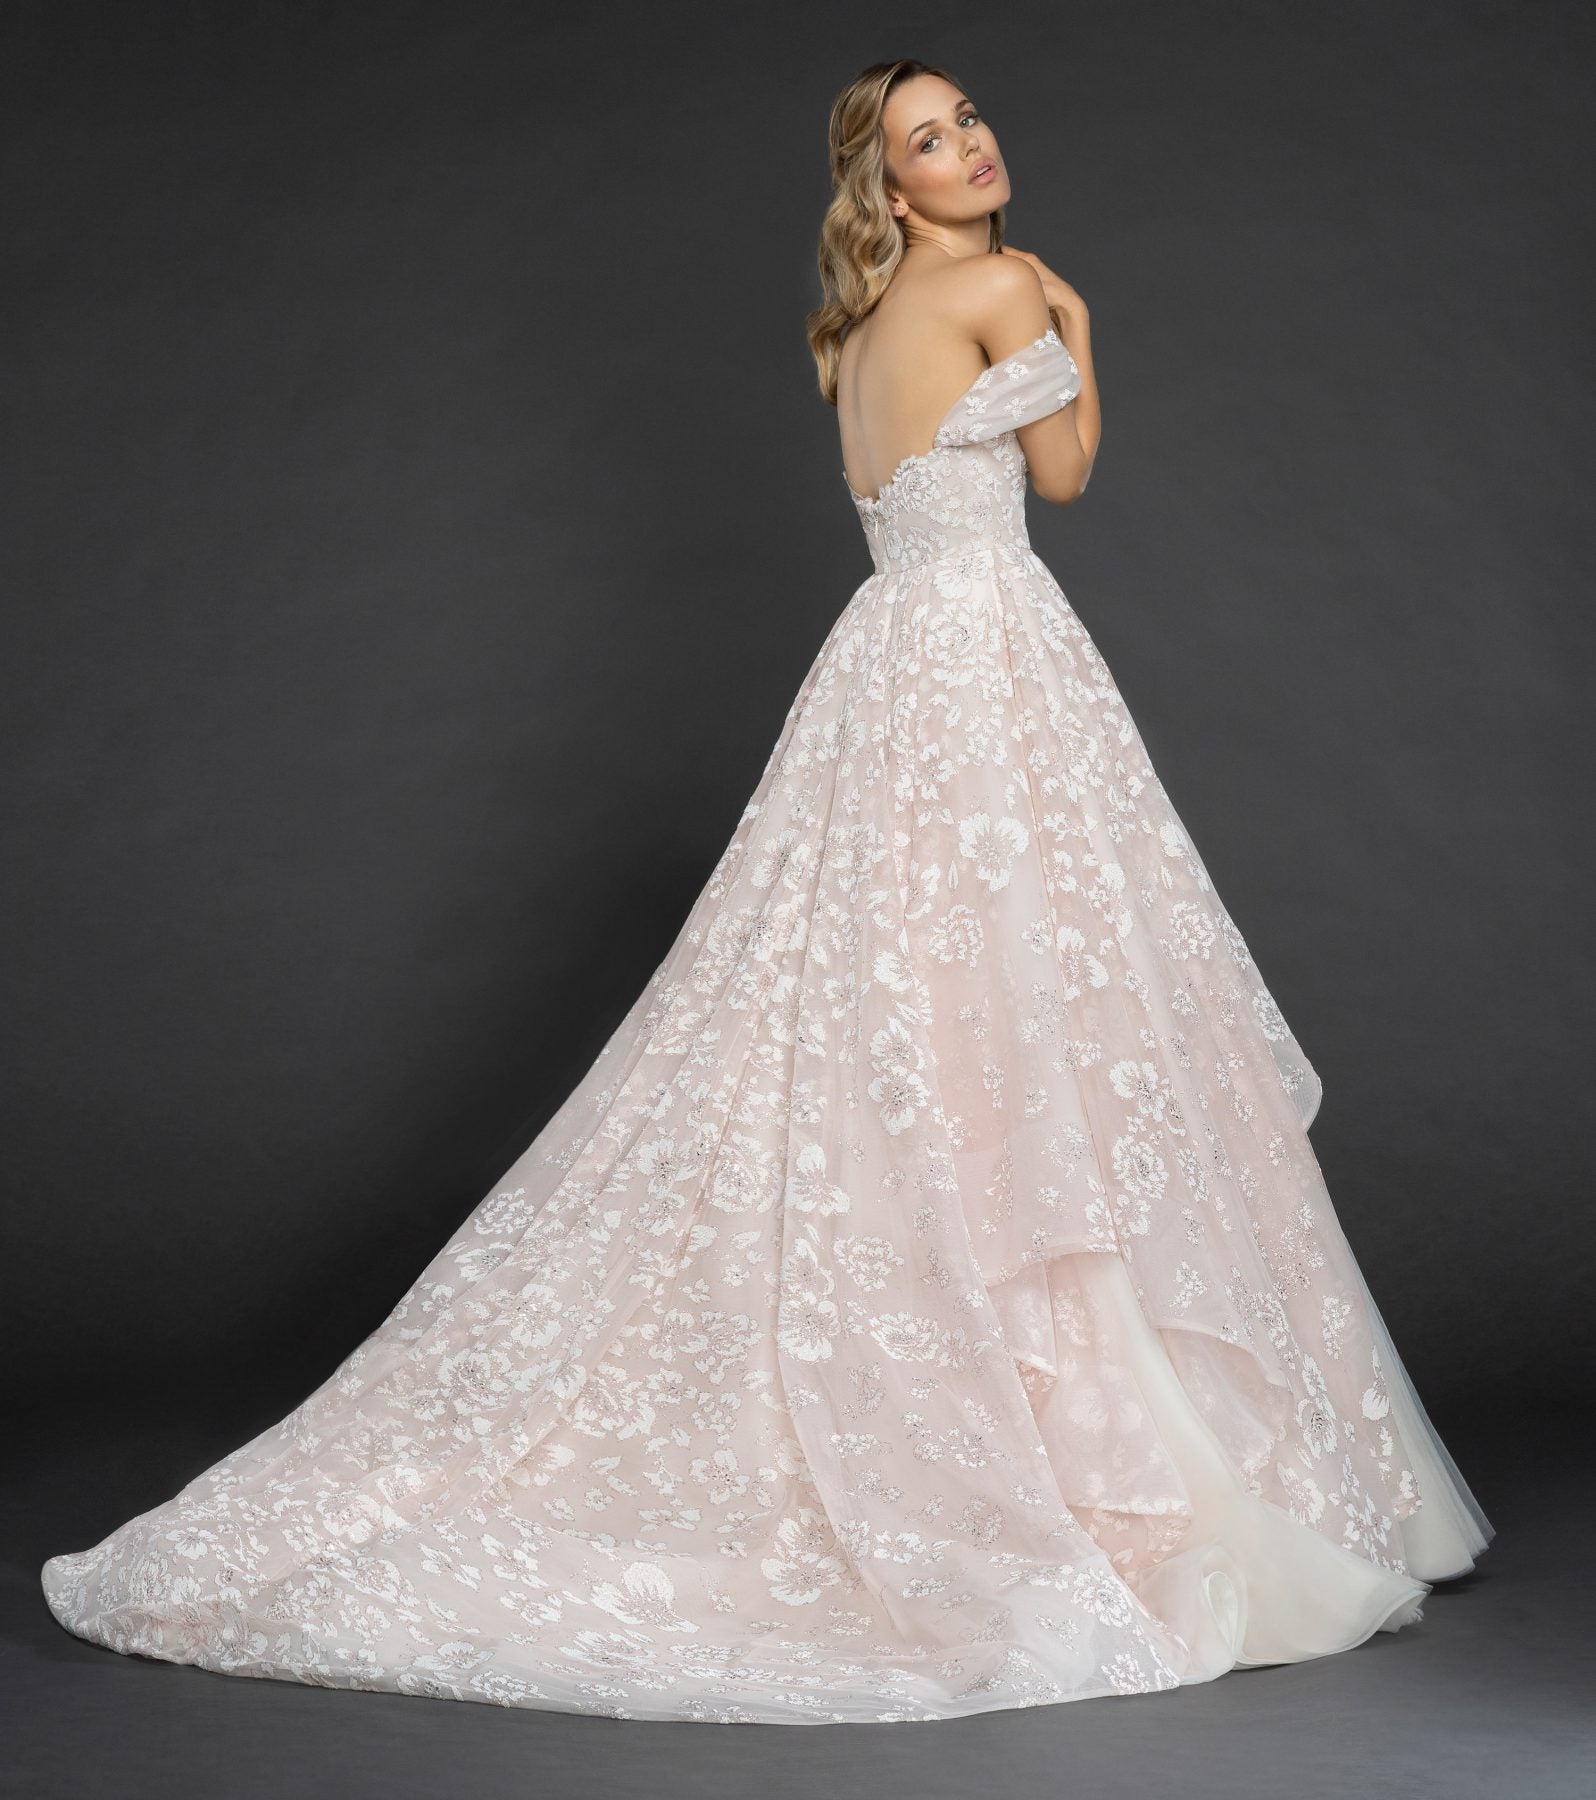 hayley-paige-off-the-shoulder-floral-embroidered-ball-gown-wedding-dress-33858804-1-1596x1800.jpg